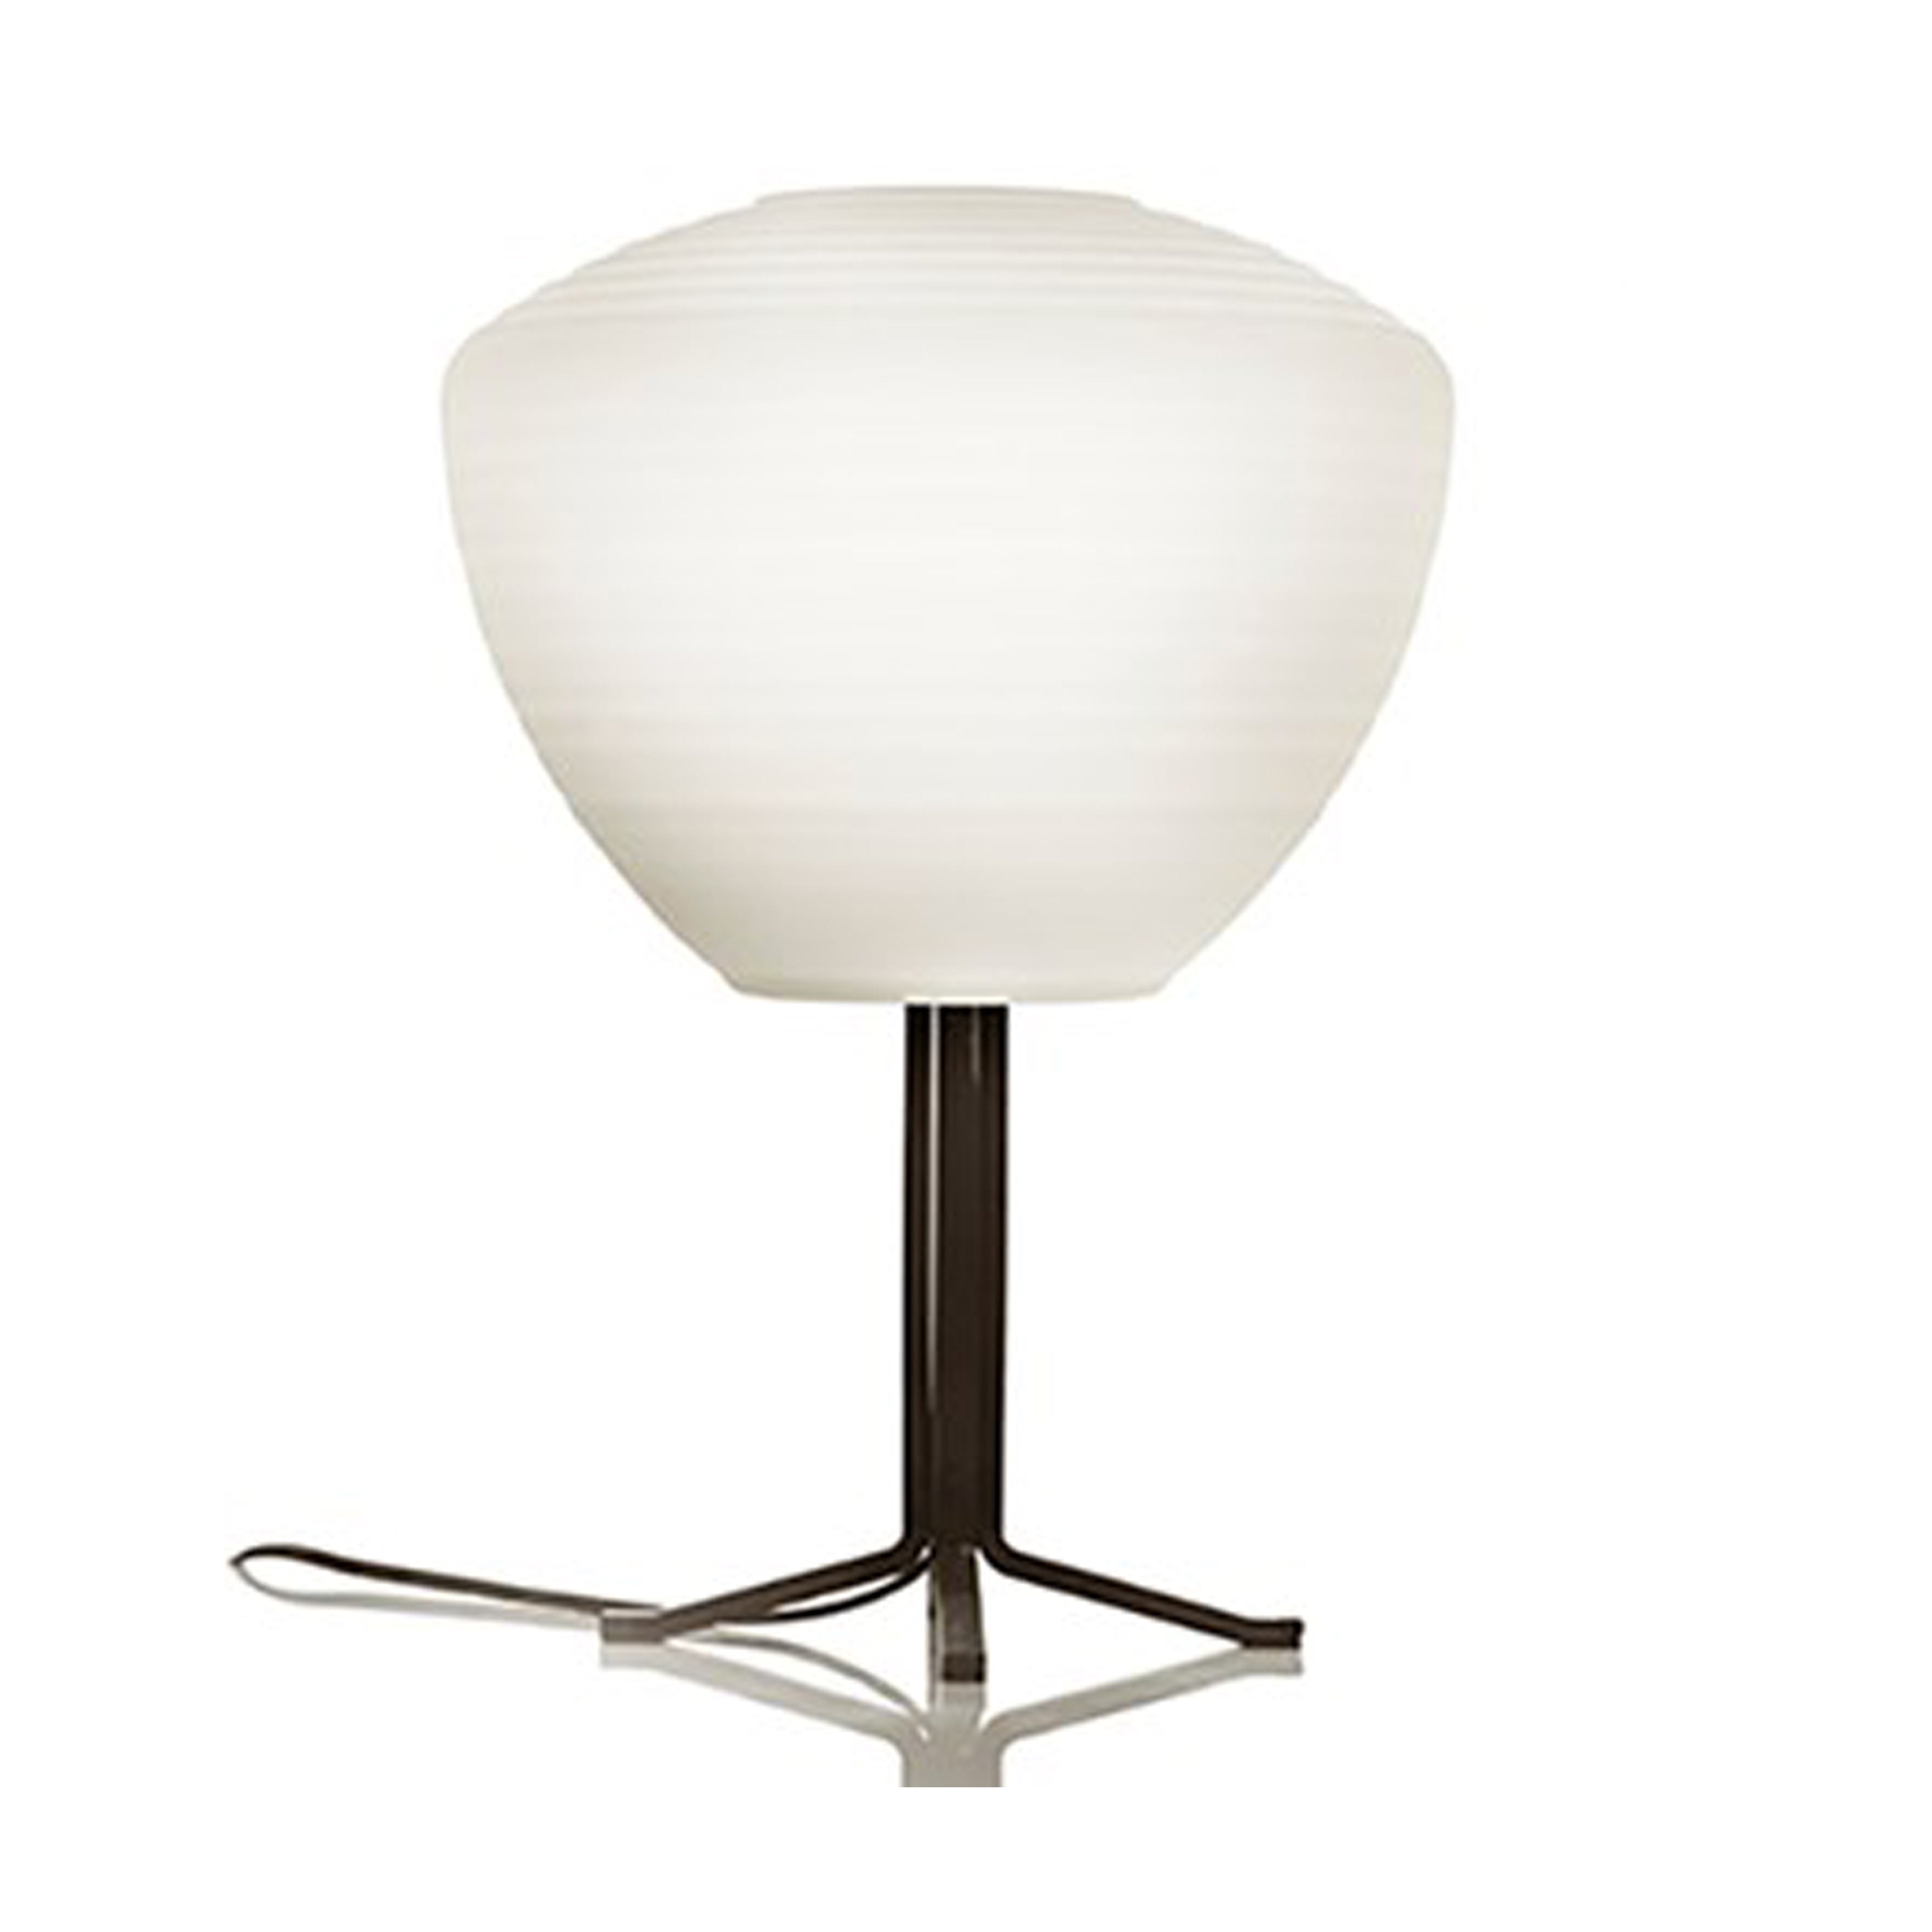 Perseo stelo table lamp, Michele De Lucchi - ONEROOM